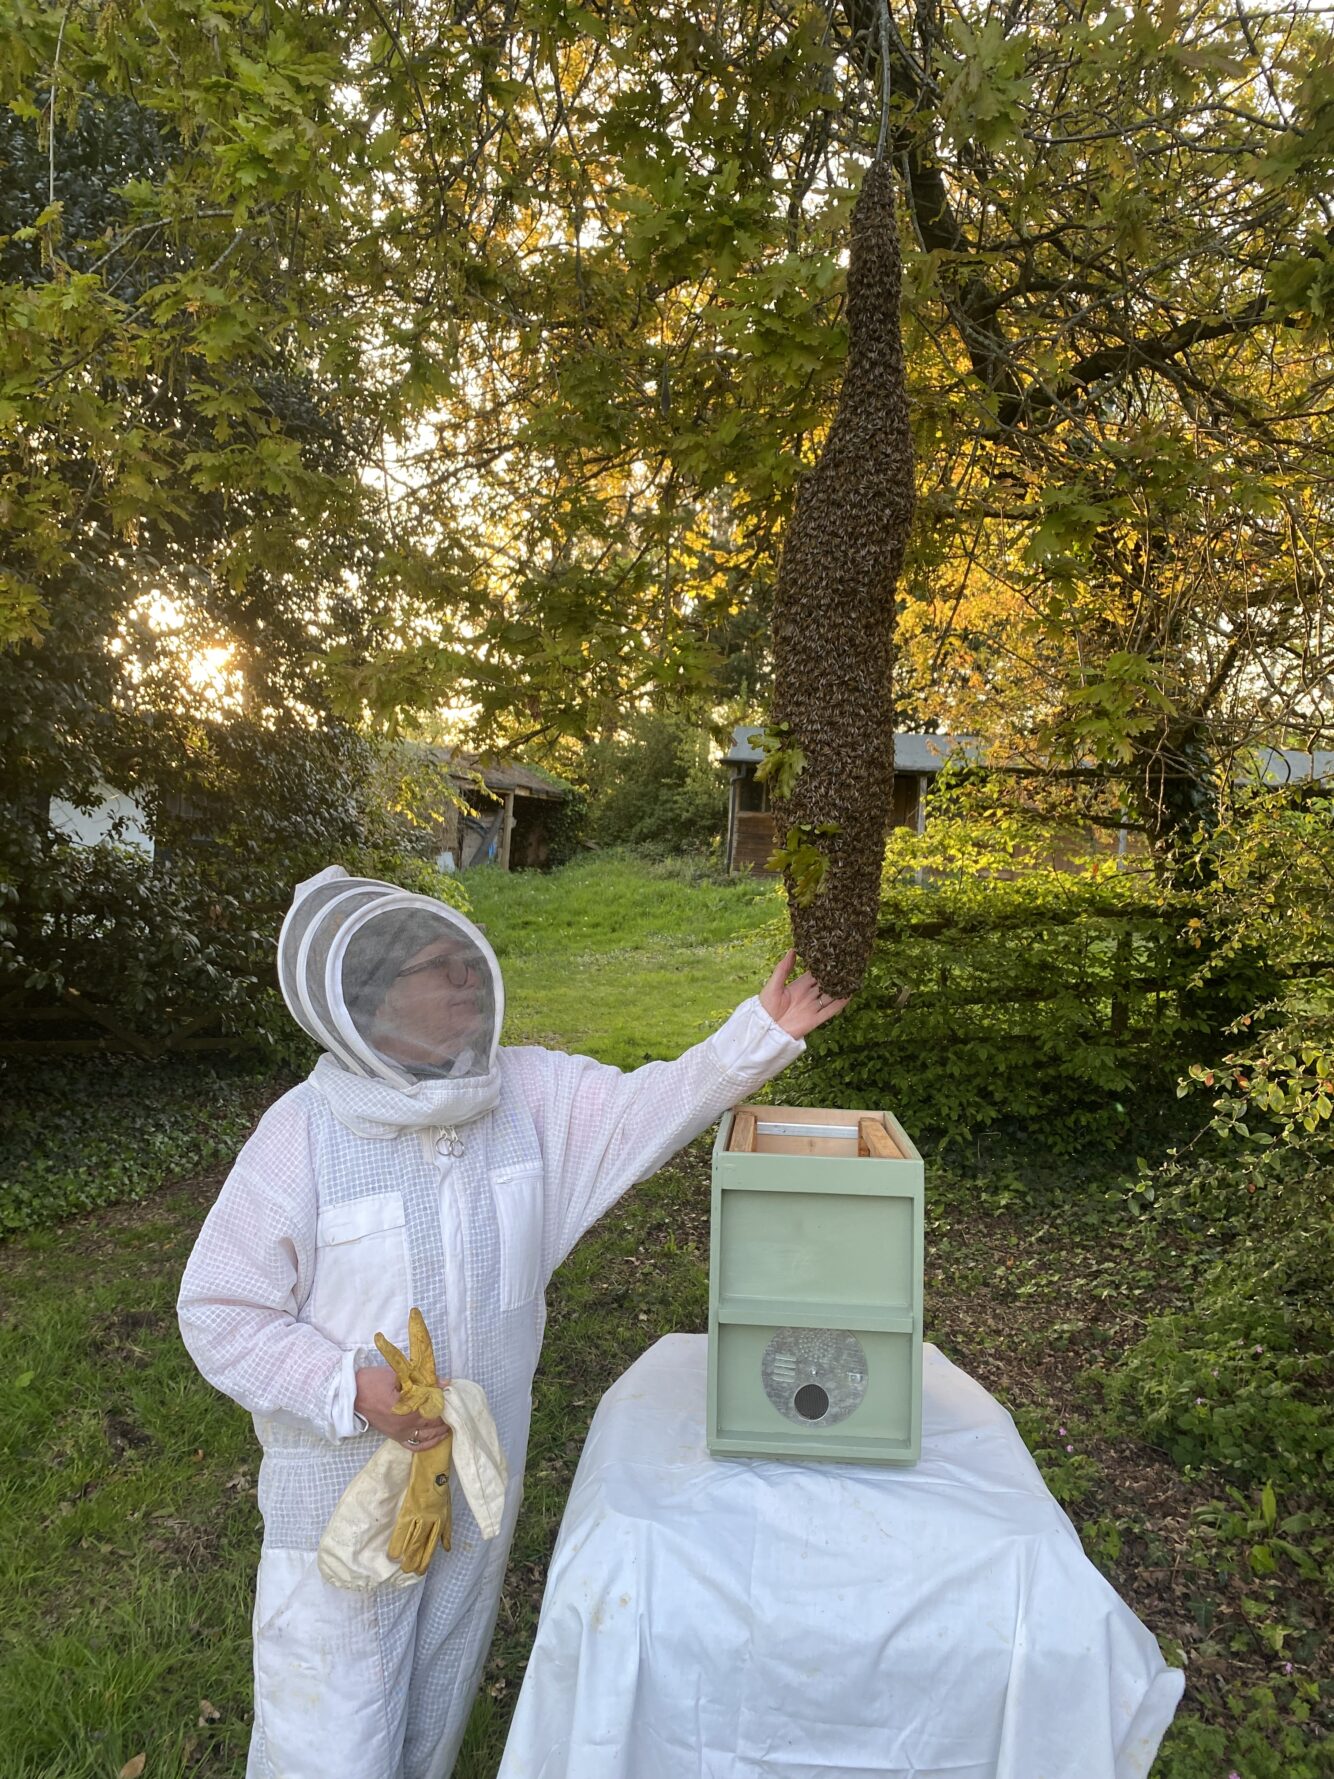 Image of Ruth in protective gear next to one of the beehives